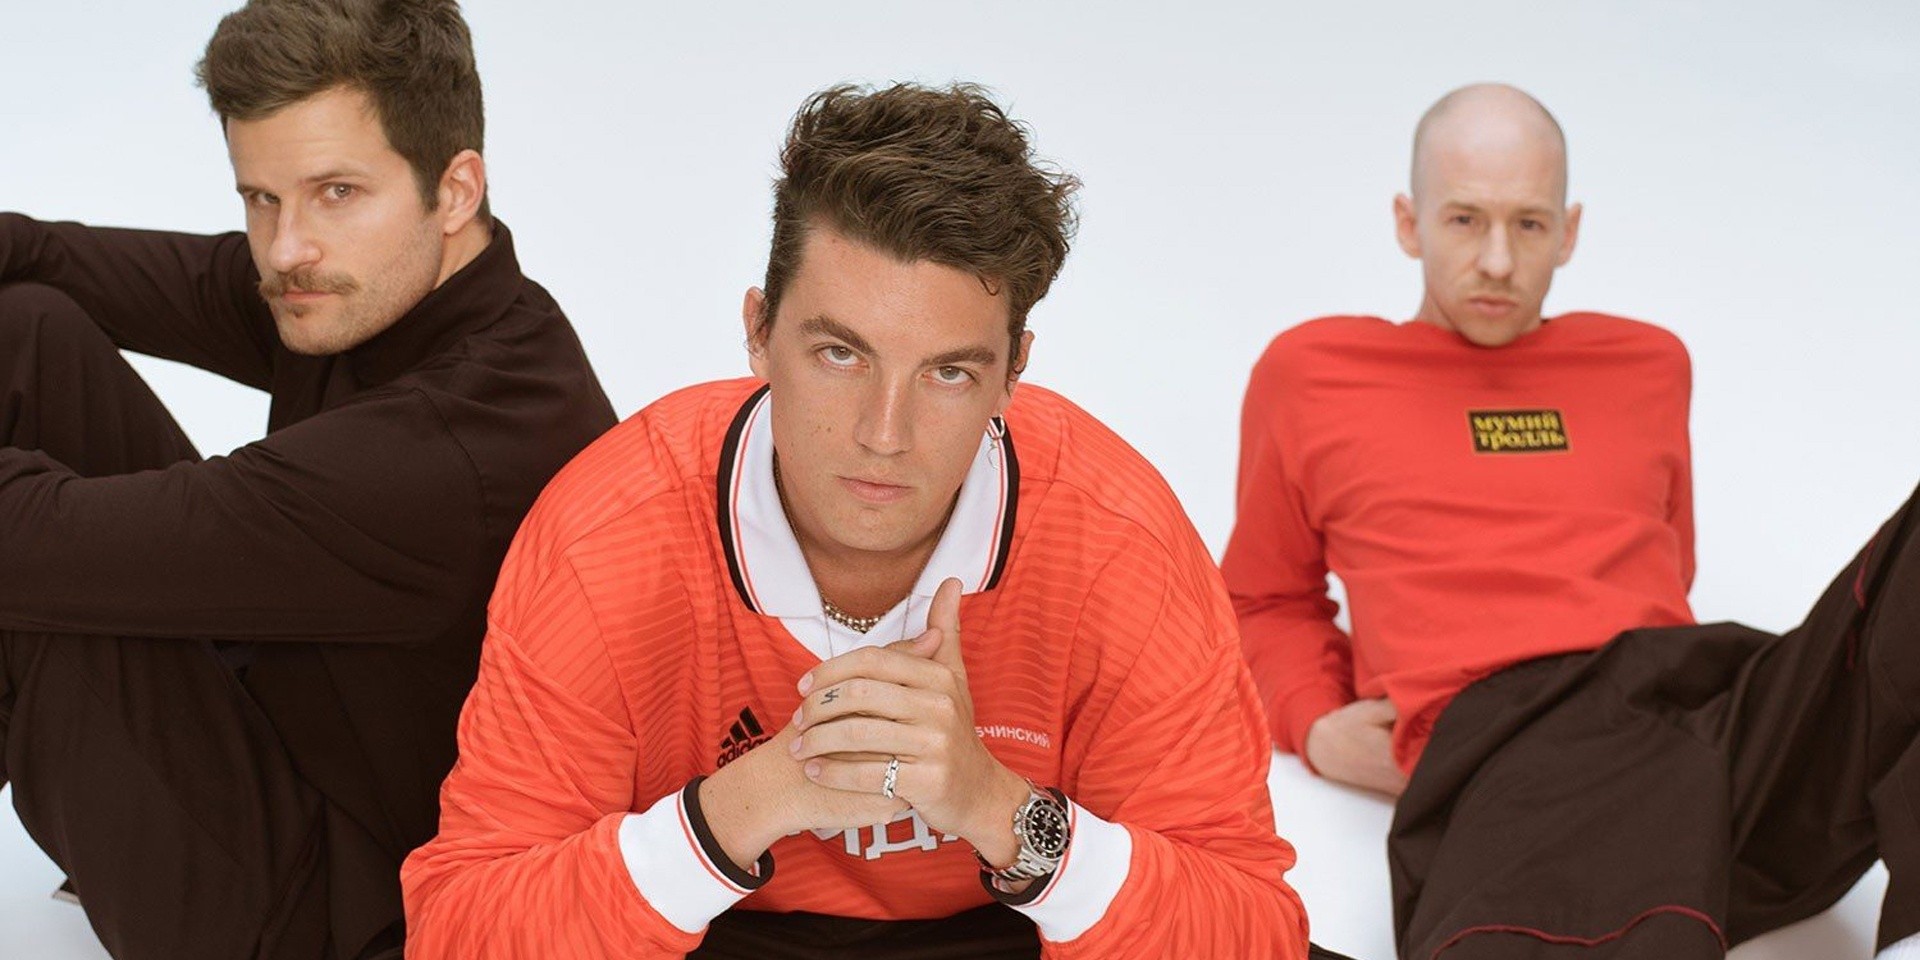 LANY albums certified Diamond and Double Diamond in the Philippines